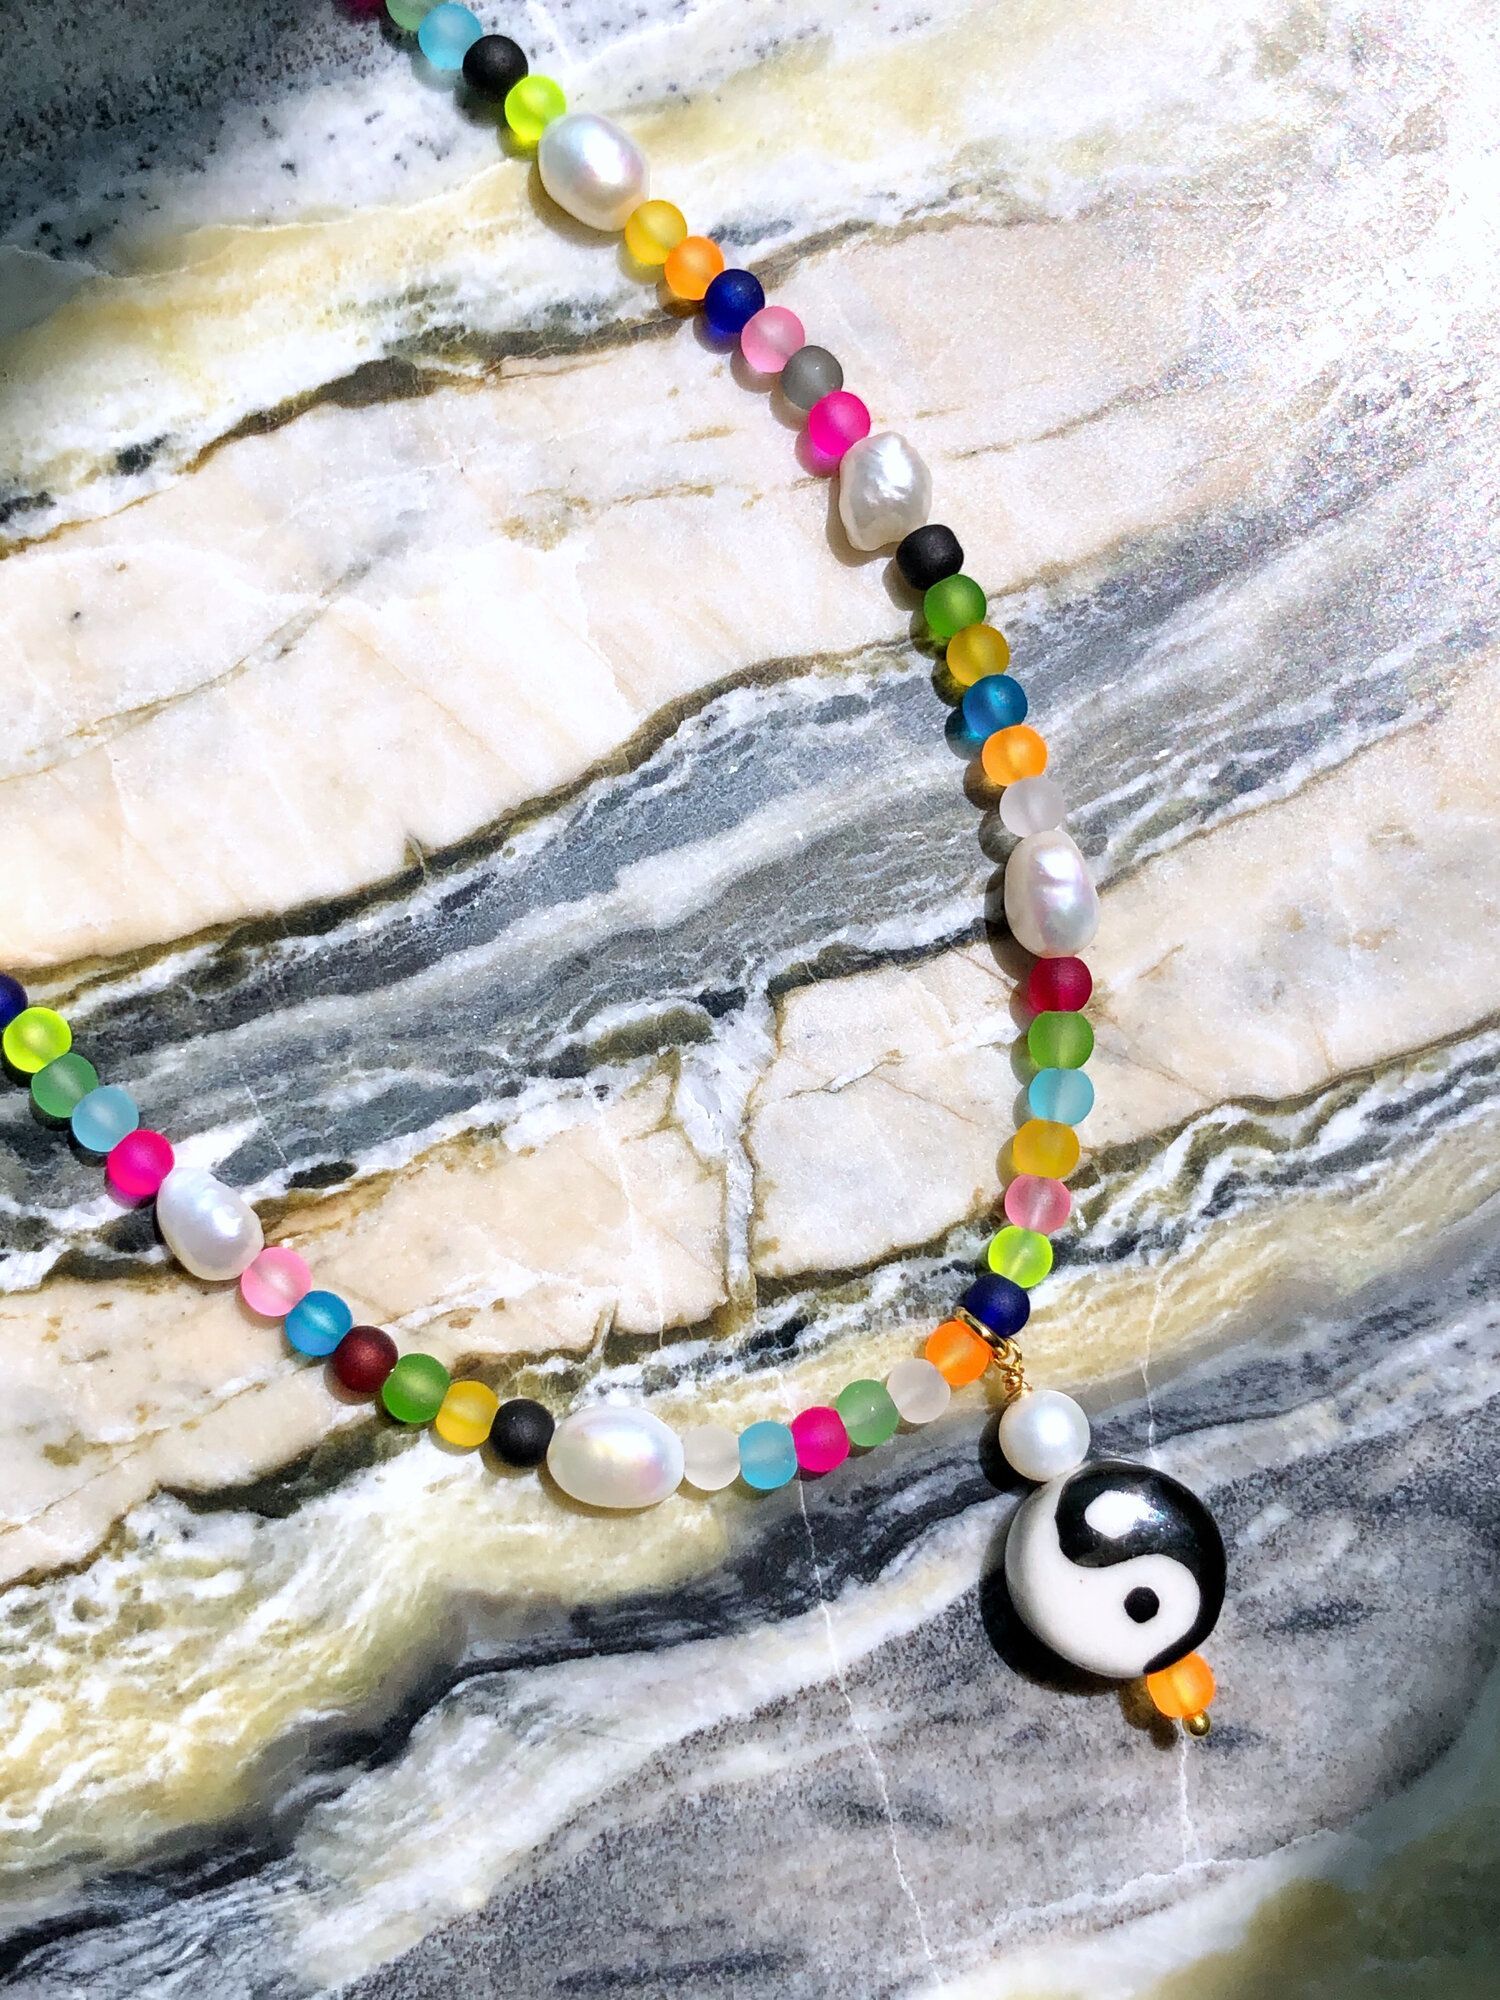 YIN TO MY YANG RAINBOW NECKLACE